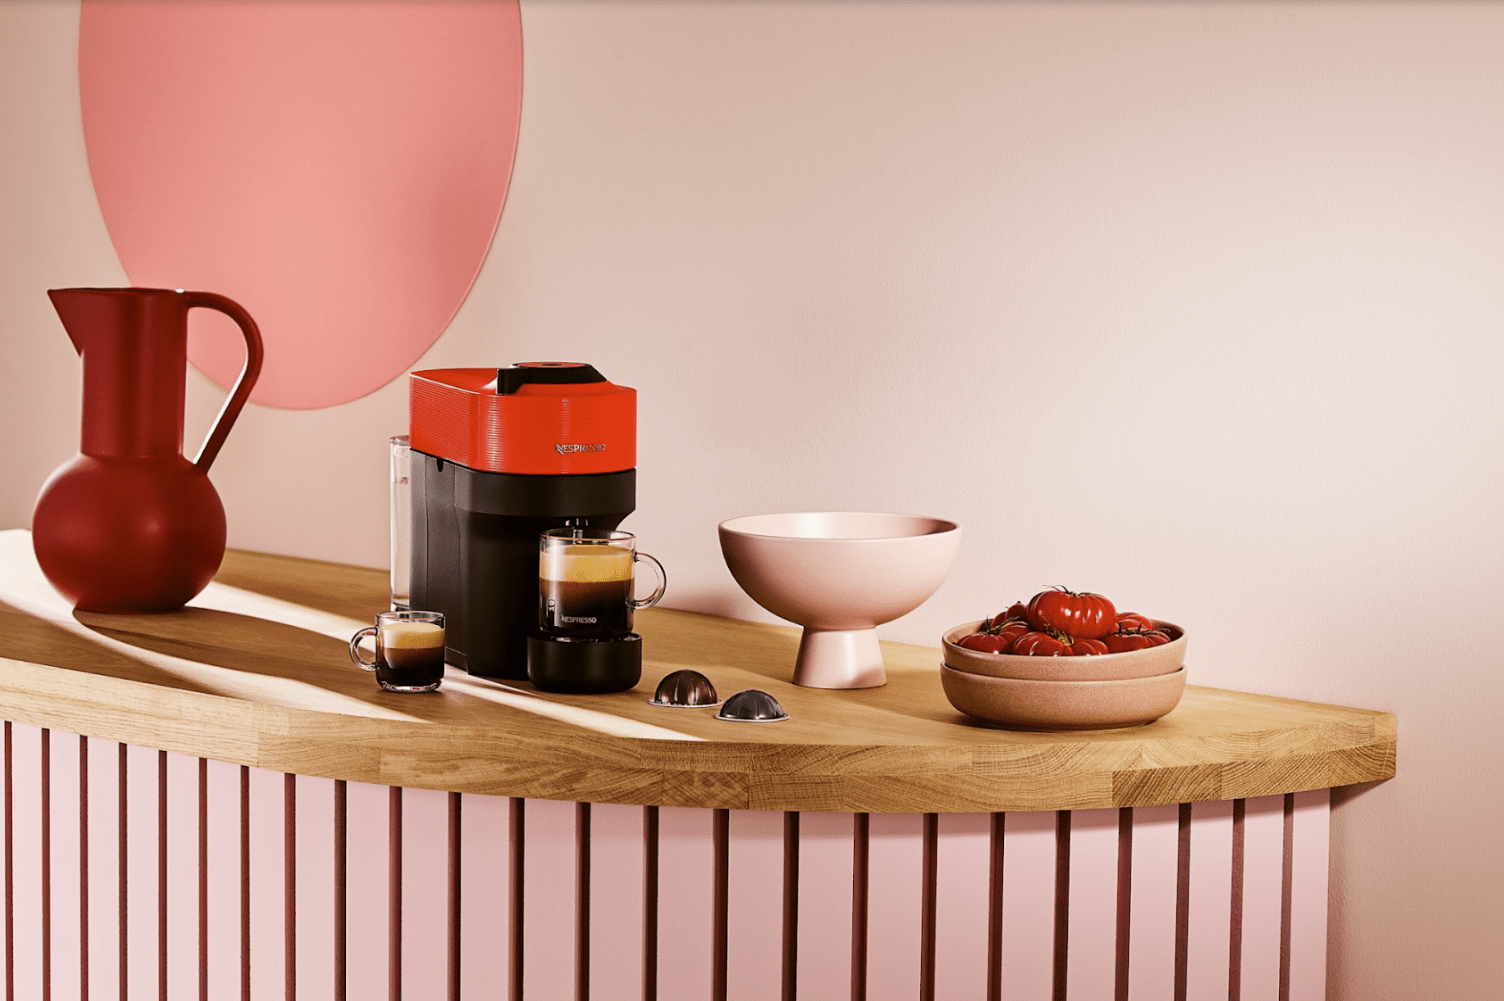 Nespresso launches their most compact coffee machine with Expert mode